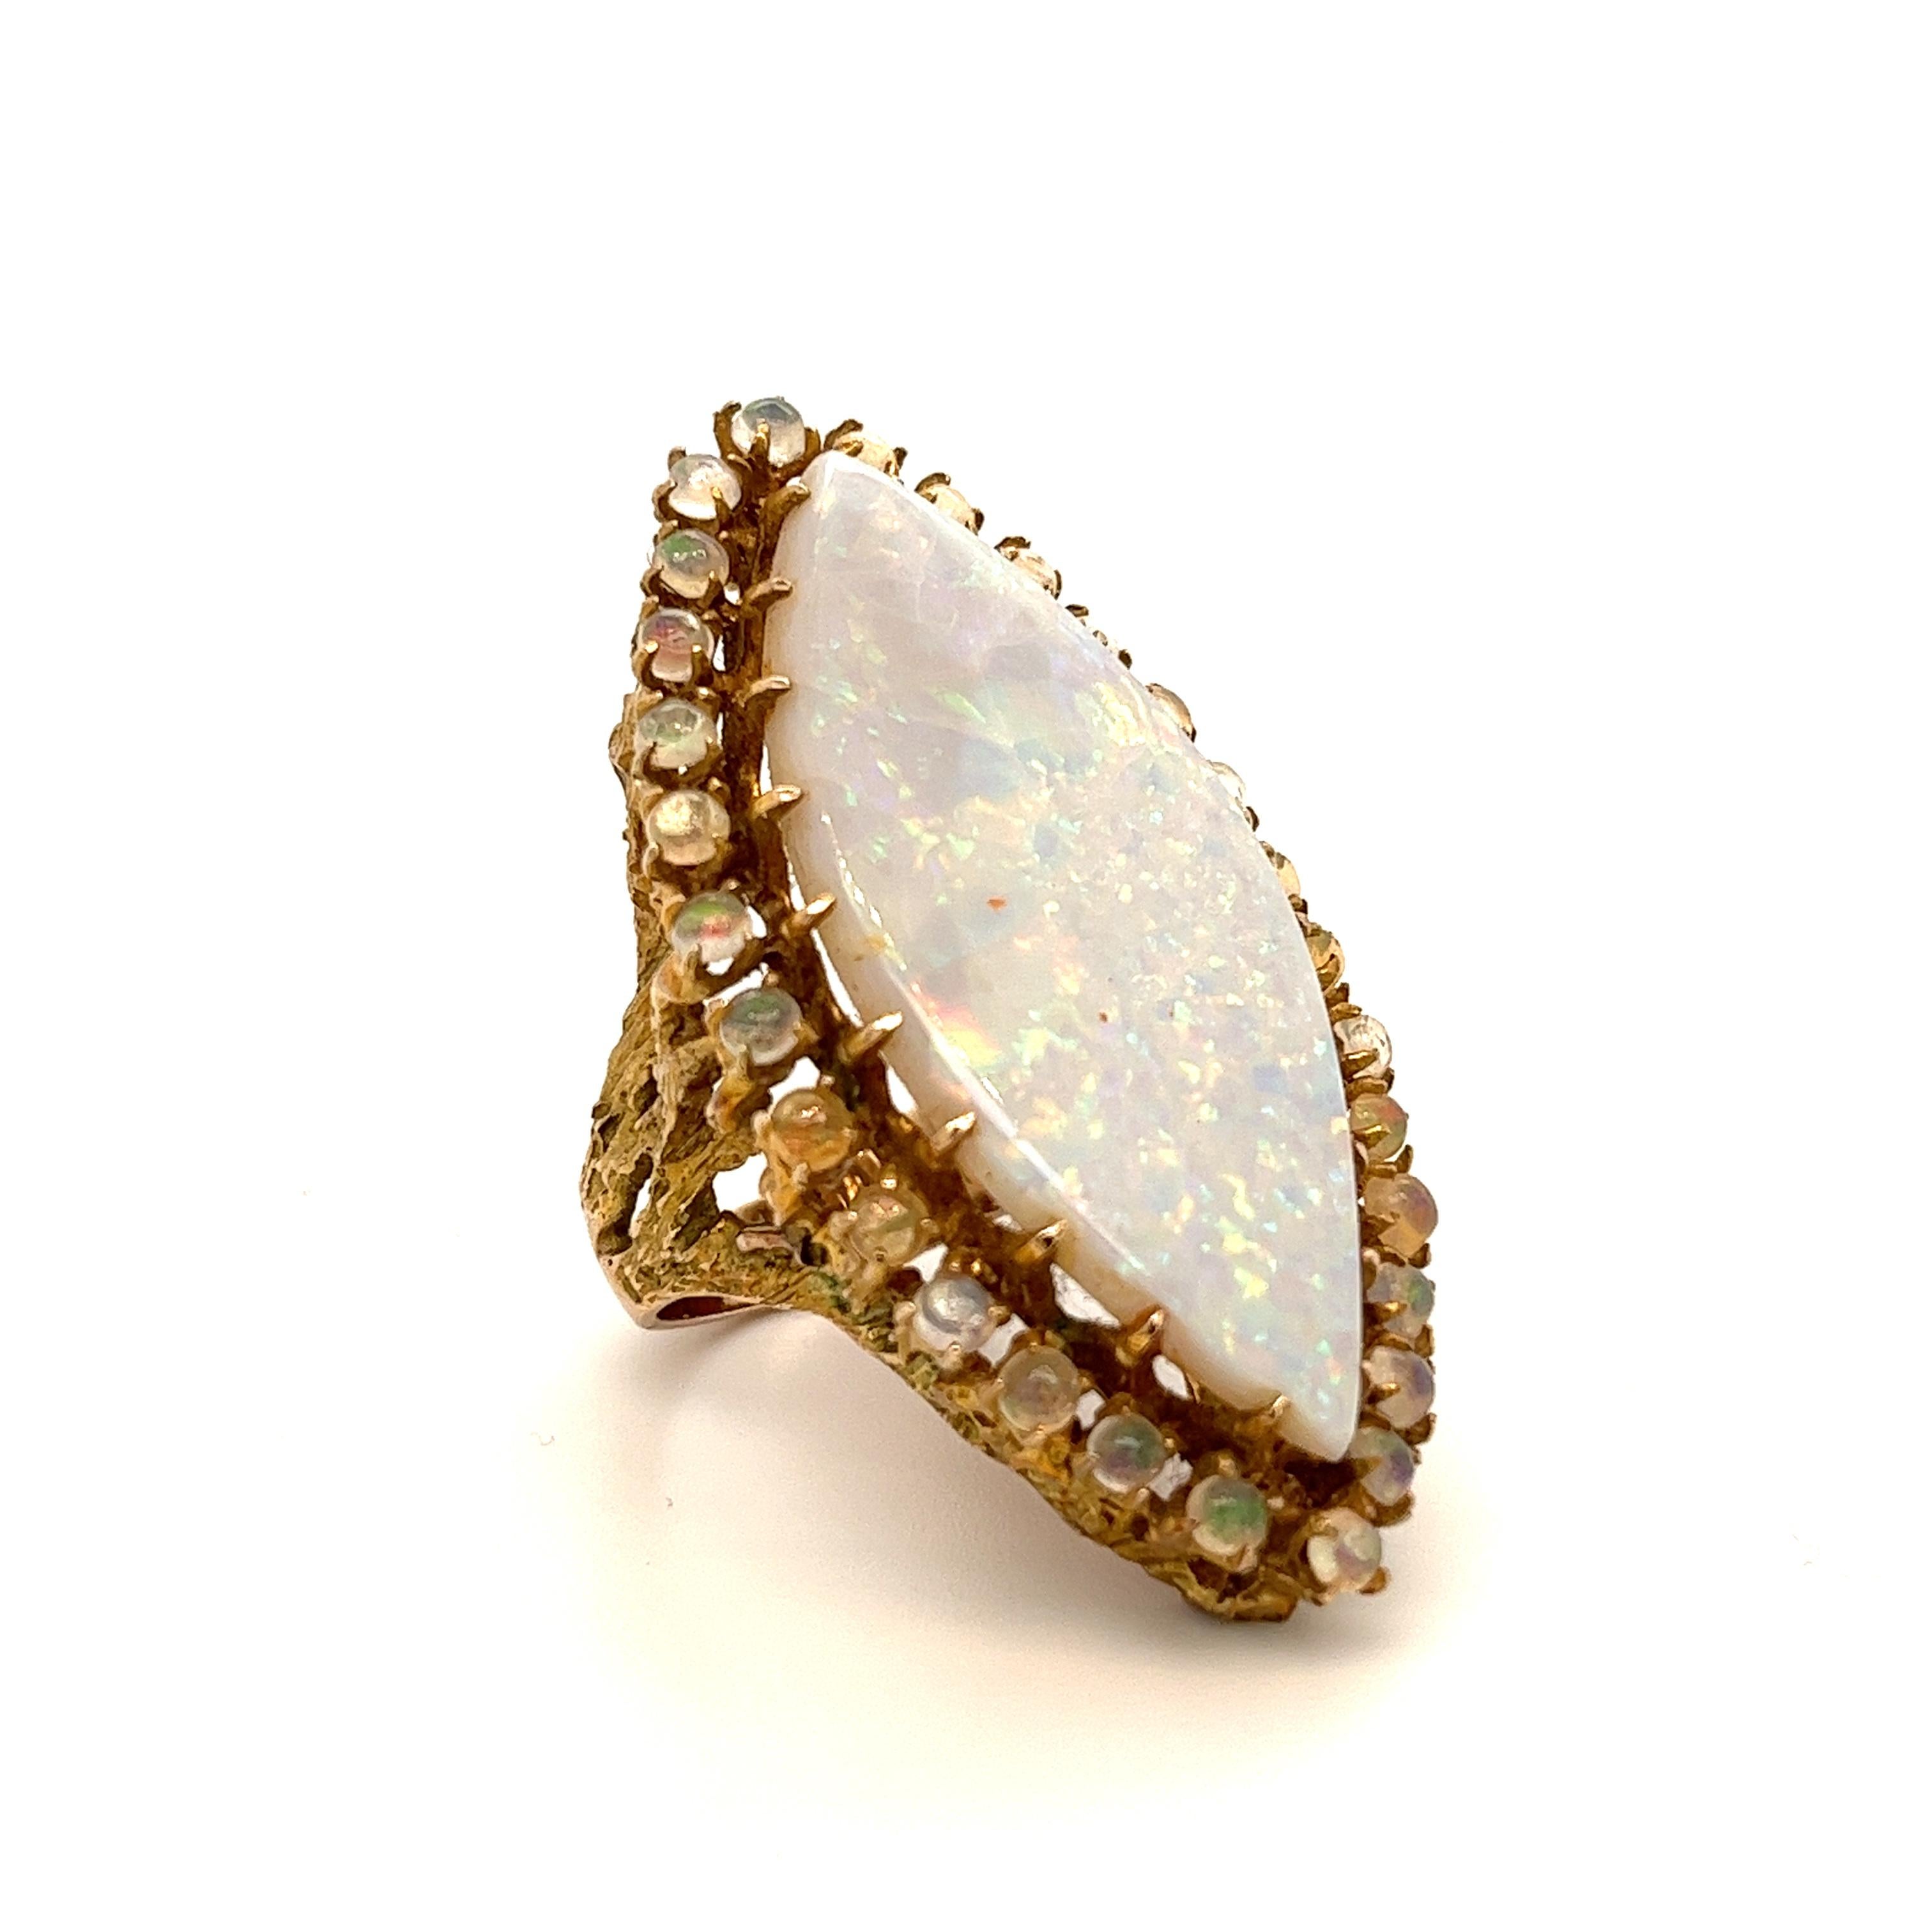 Natural marquise-shaped White Opal set in a halo of 30 ball-shaped natural Opal gemstones. The Opals are set in 14k solid yellow gold. The ring mounting is handmade in a tree-like design that blossoms upwards into the halo set Opals. A piece certain